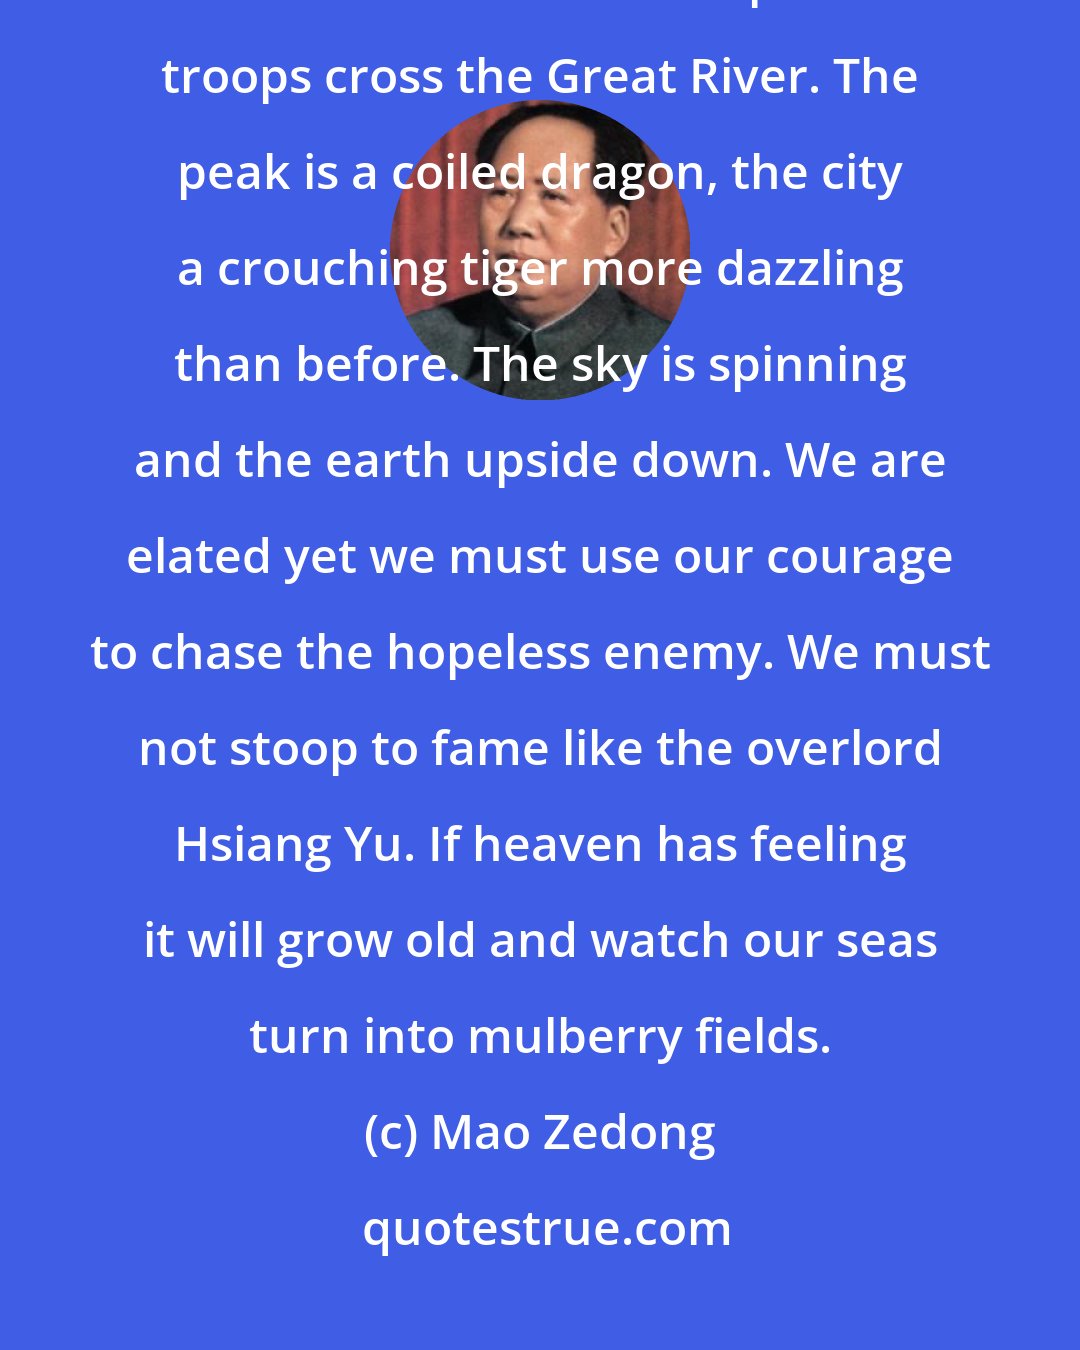 Mao Zedong: Capture of Nanking Rain and a windstorm rage blue and yellow over Chung the bell mountain as a million peerless troops cross the Great River. The peak is a coiled dragon, the city a crouching tiger more dazzling than before. The sky is spinning and the earth upside down. We are elated yet we must use our courage to chase the hopeless enemy. We must not stoop to fame like the overlord Hsiang Yu. If heaven has feeling it will grow old and watch our seas turn into mulberry fields.